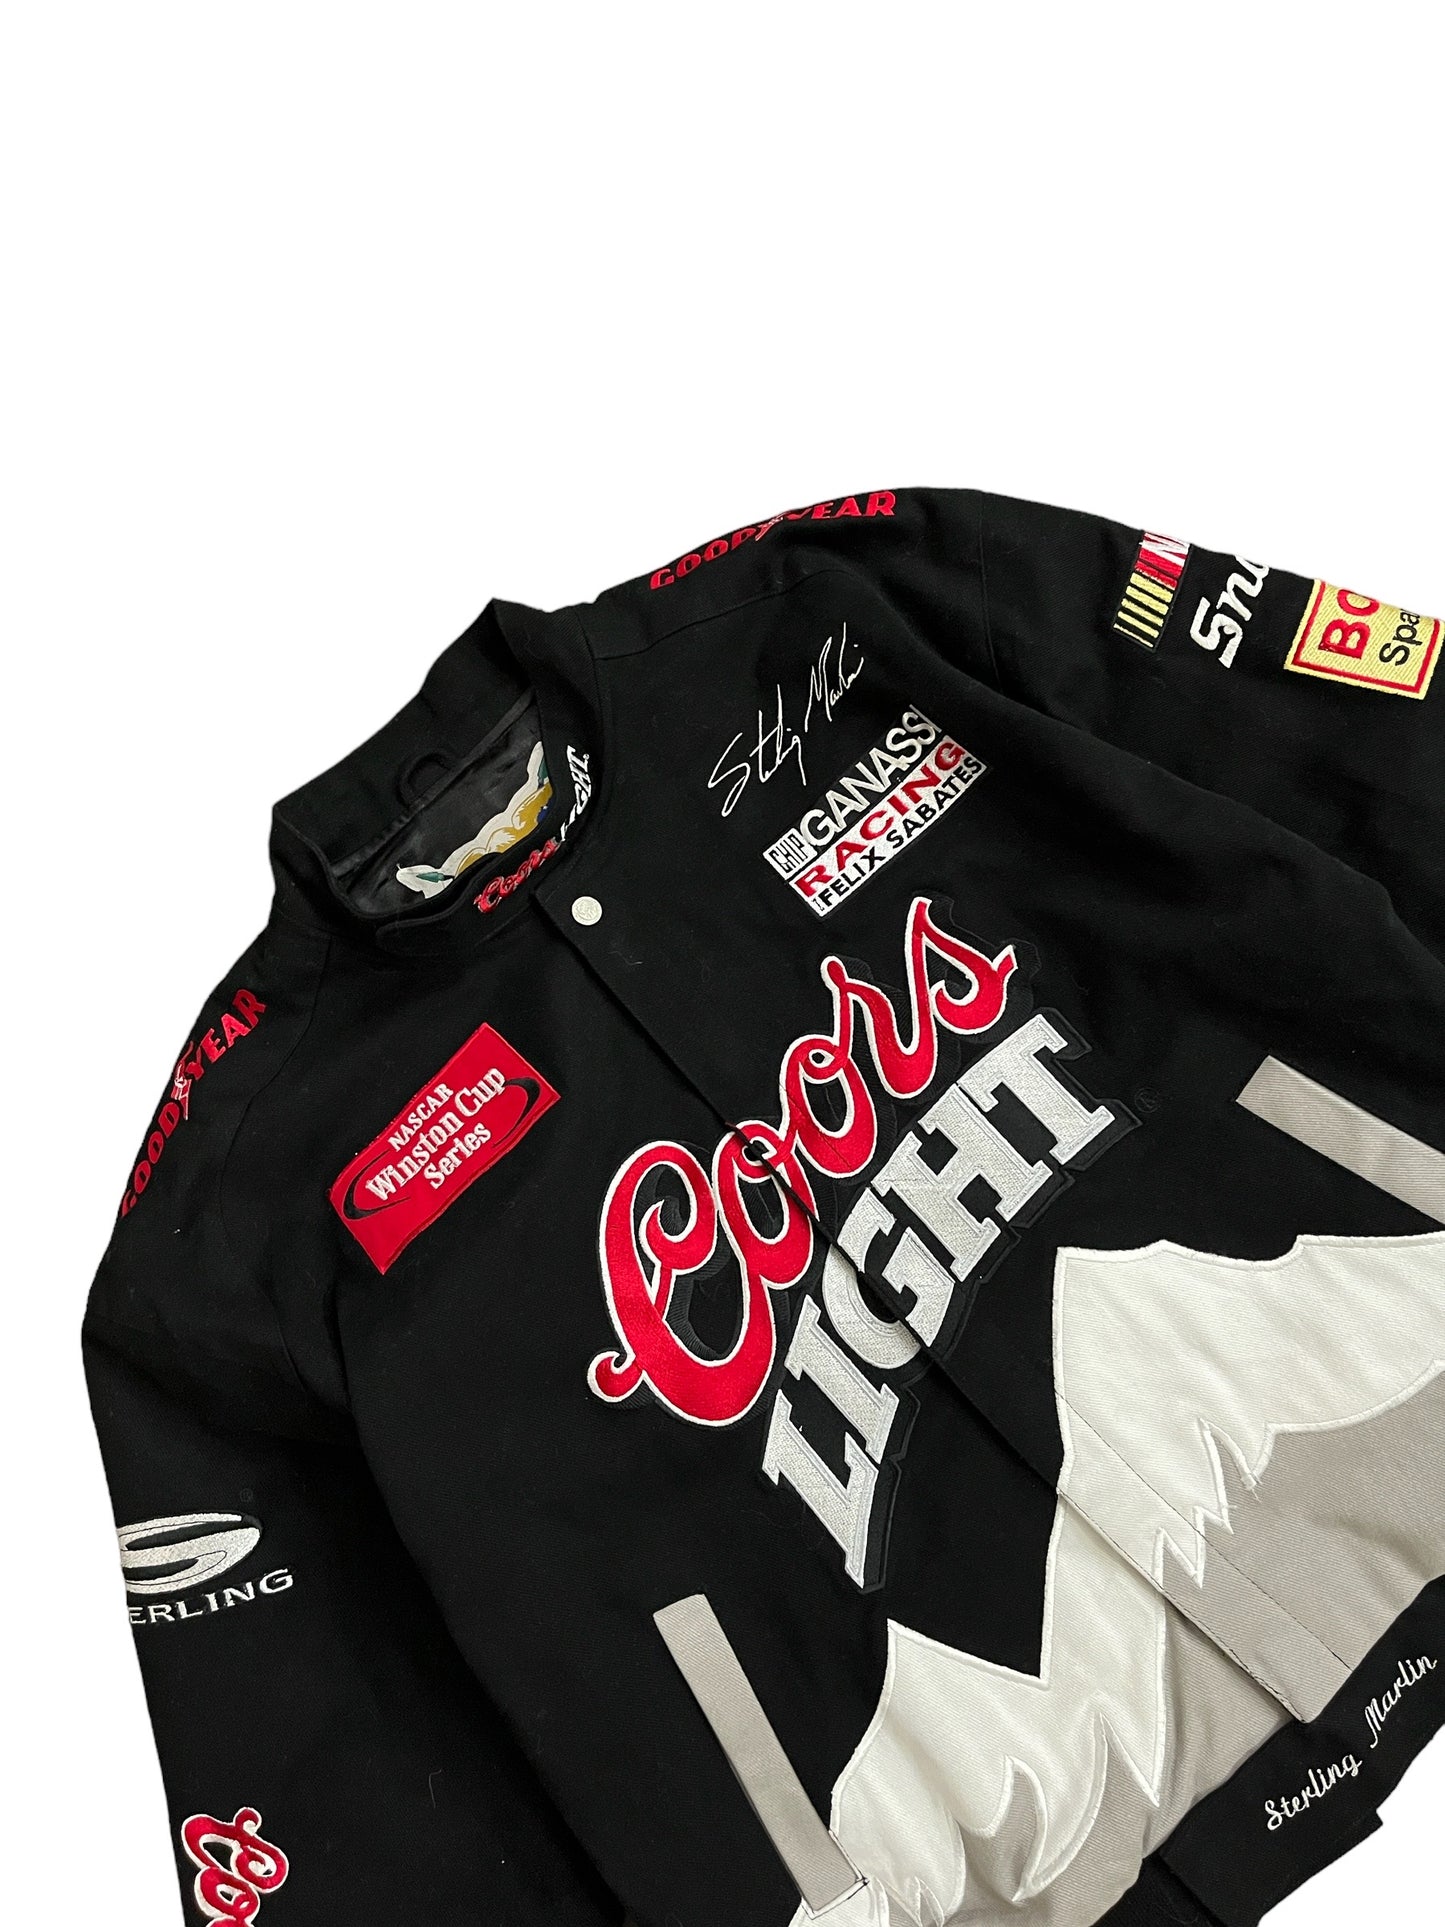 Limited Edition Vintage Nascar "Coors Light" by Jeff Hamilton Racing Jacket